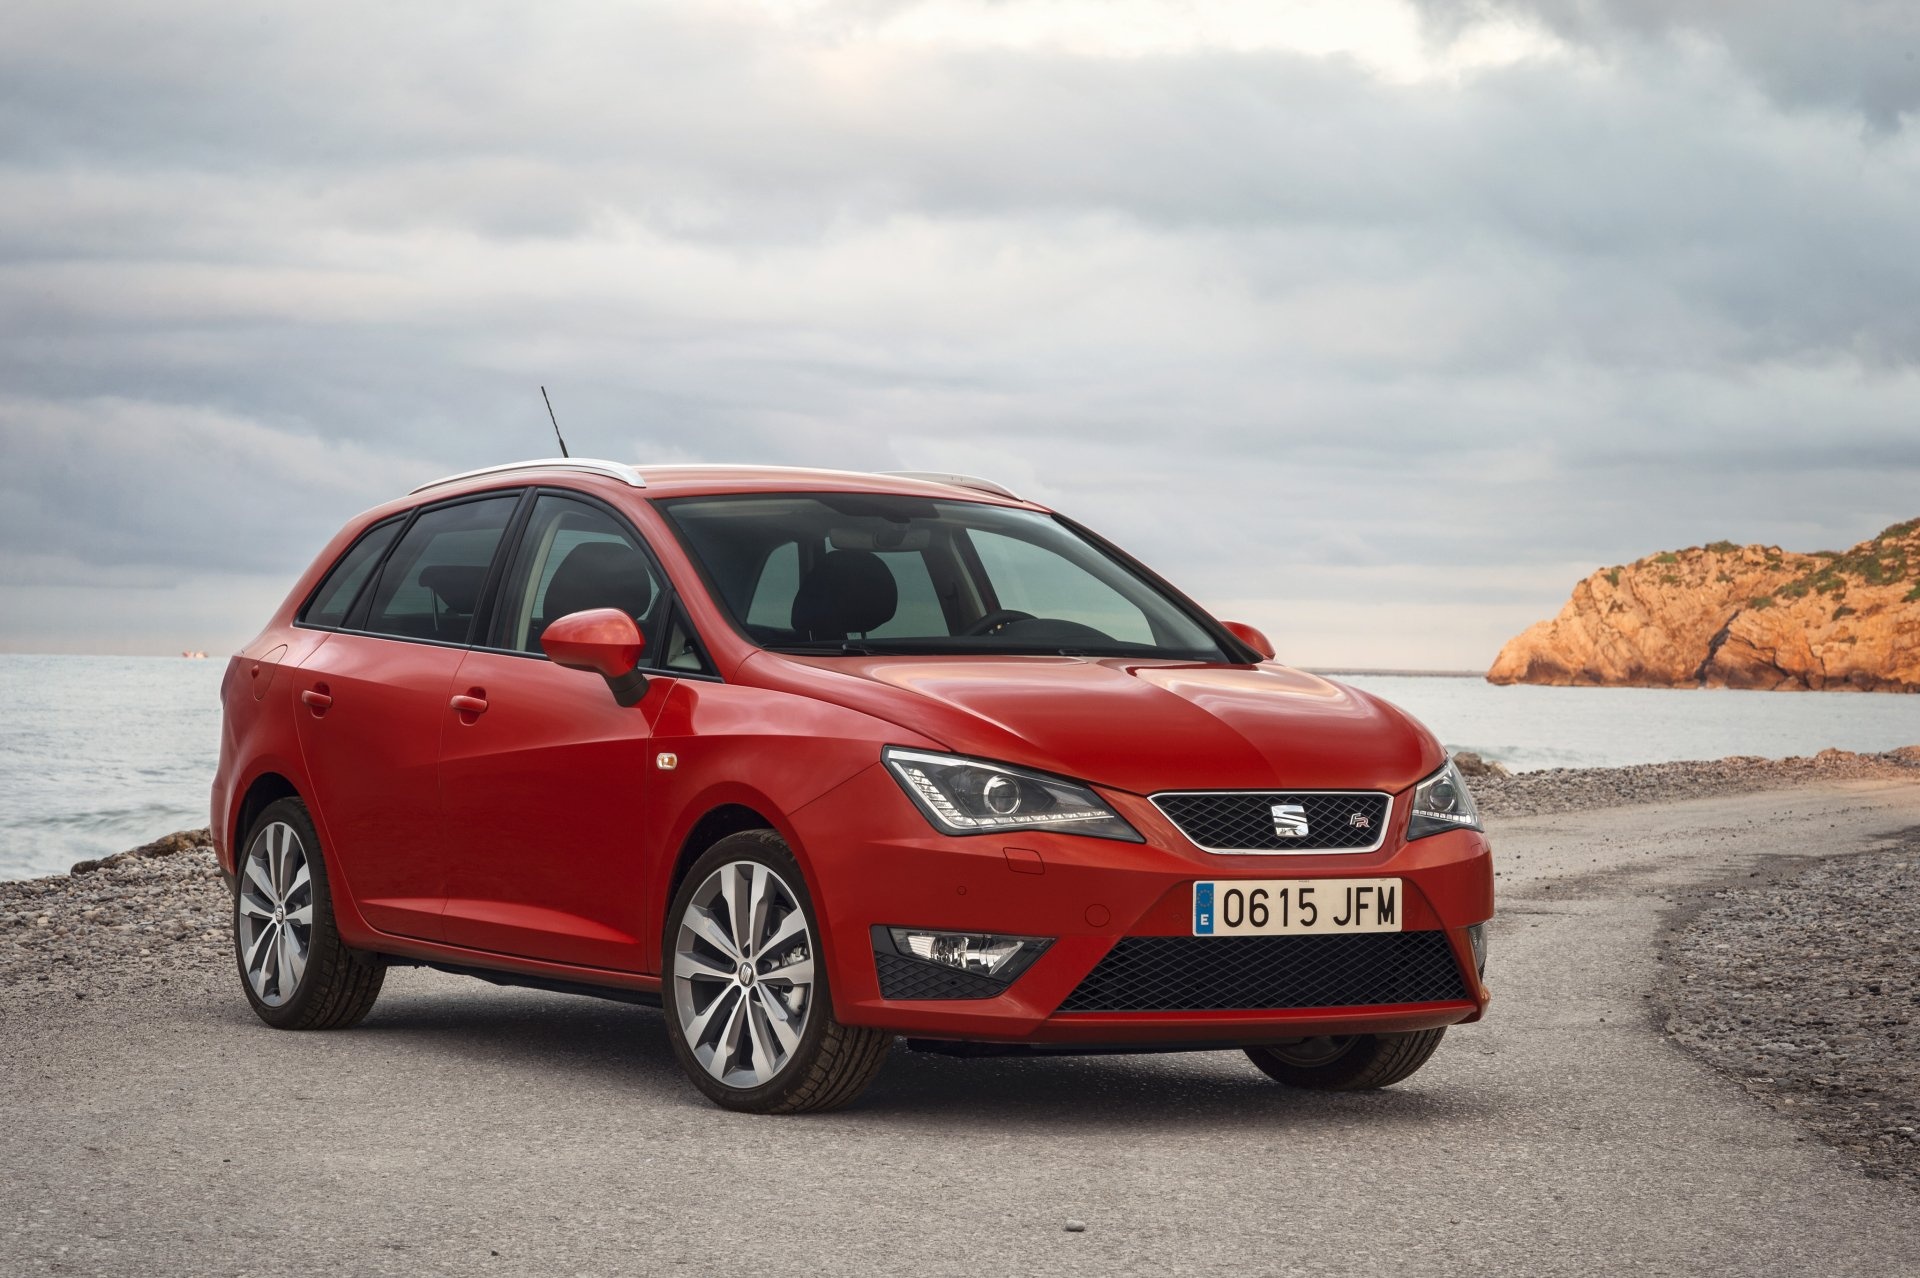 Seat Ibiza, Captivating 4K wallpapers, Dynamic and compact, Unparalleled style, 1920x1280 HD Desktop